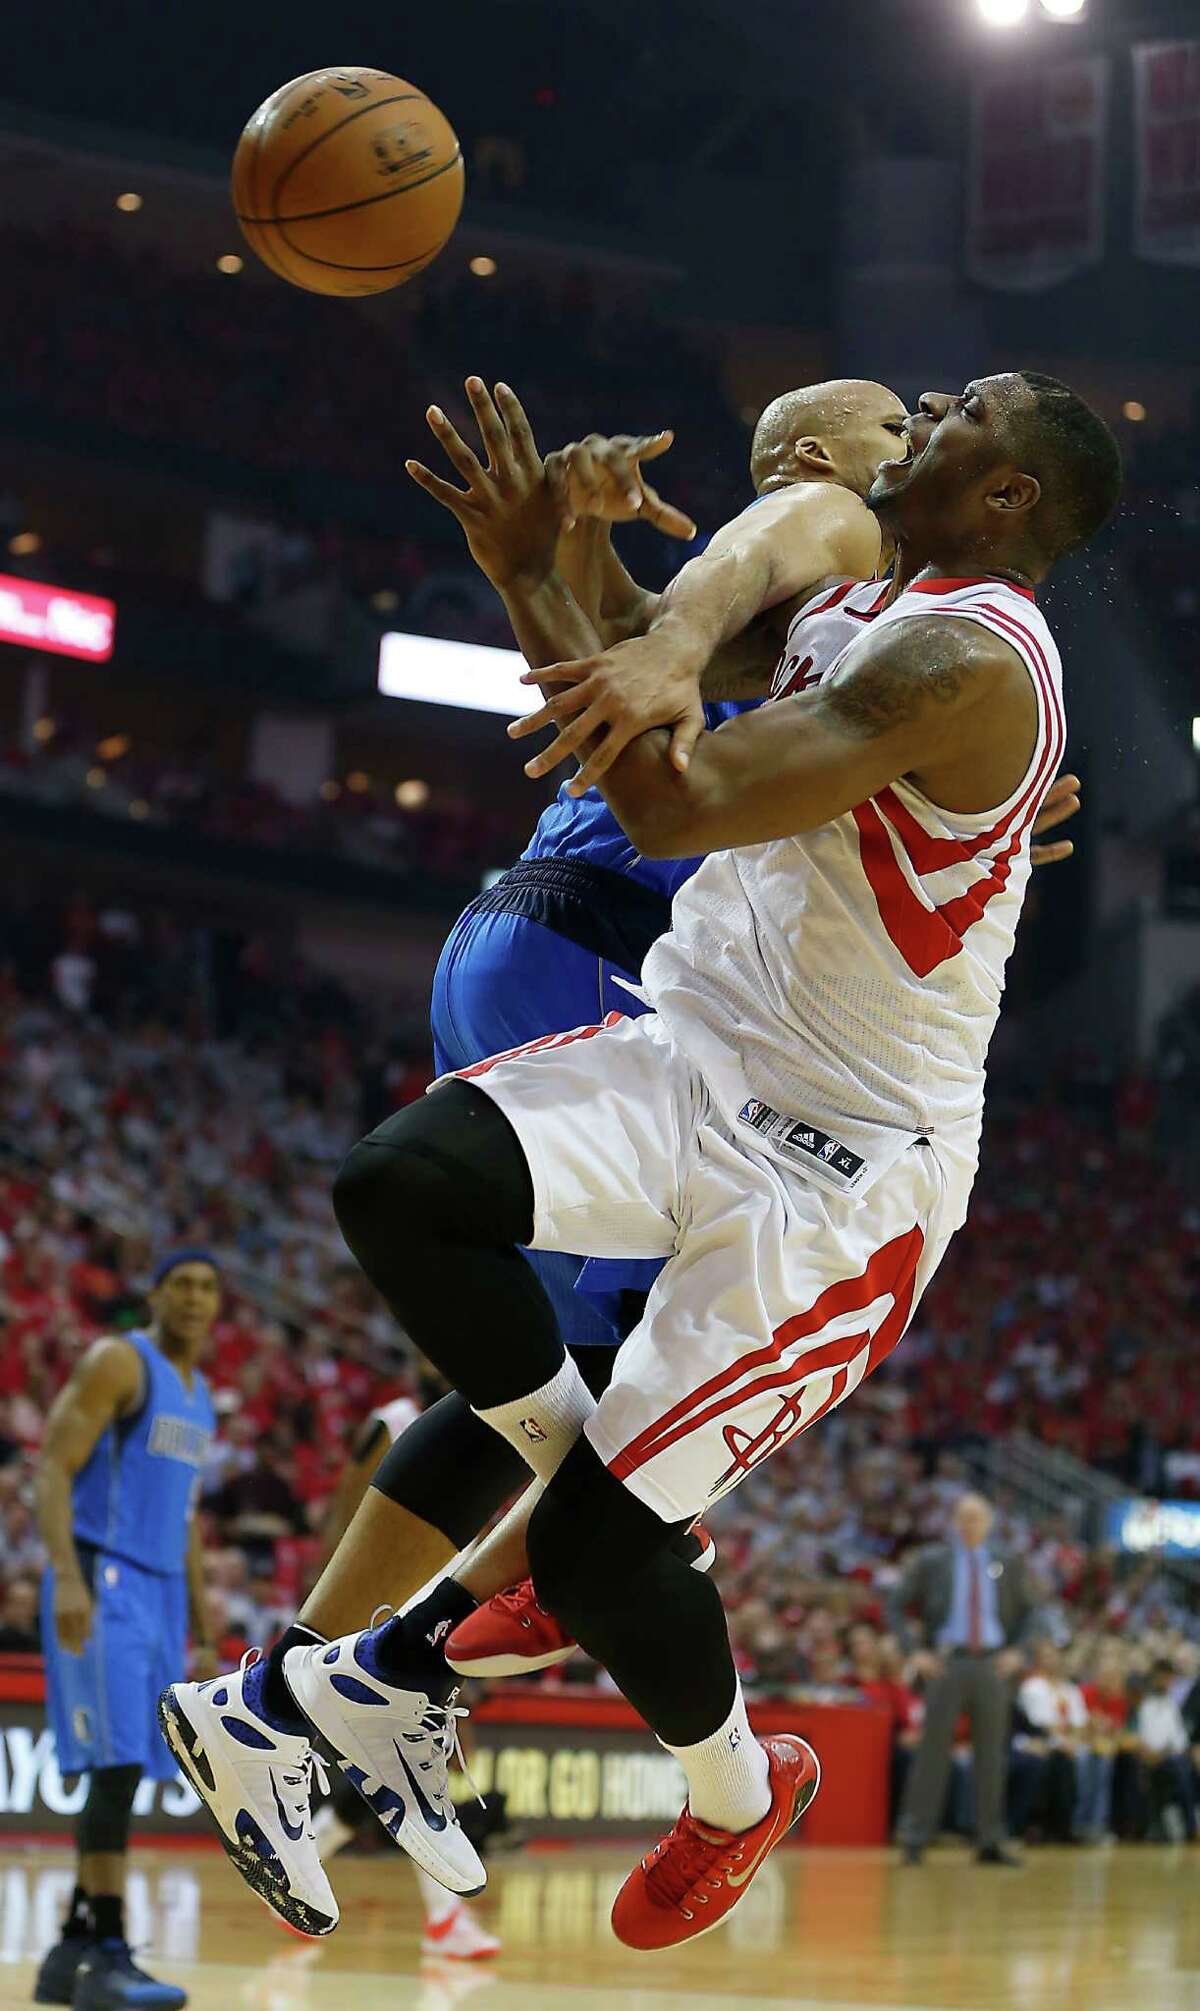 The Mavs' Richard Jefferson gets his money's worth on a hard foul against Terrence Jones.